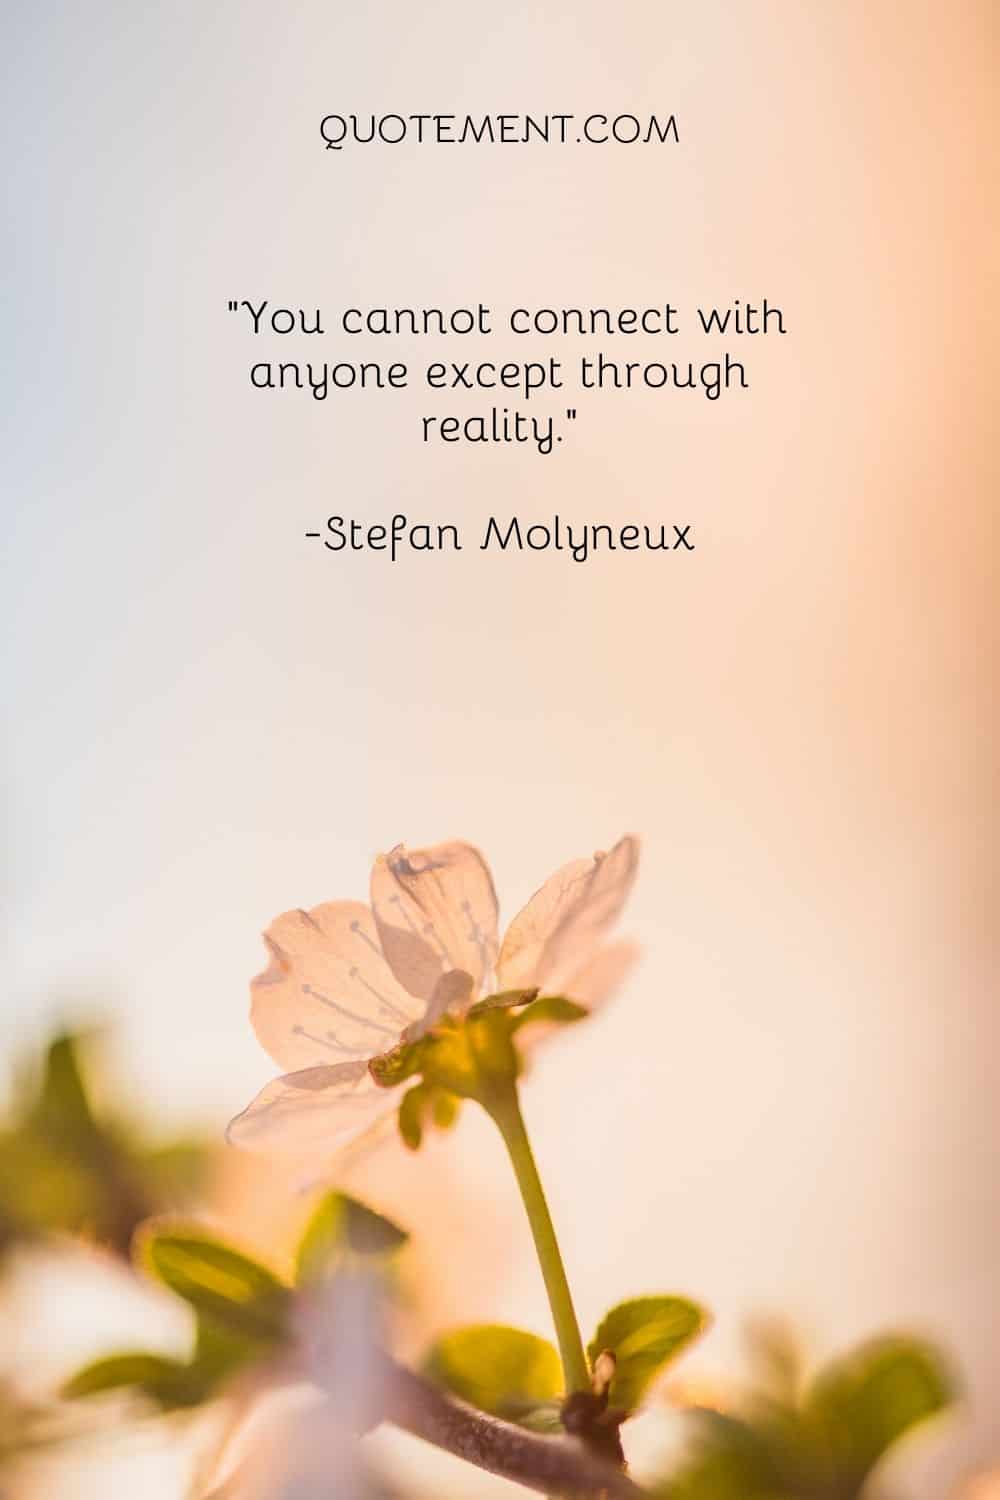 You cannot connect with anyone except through reality.